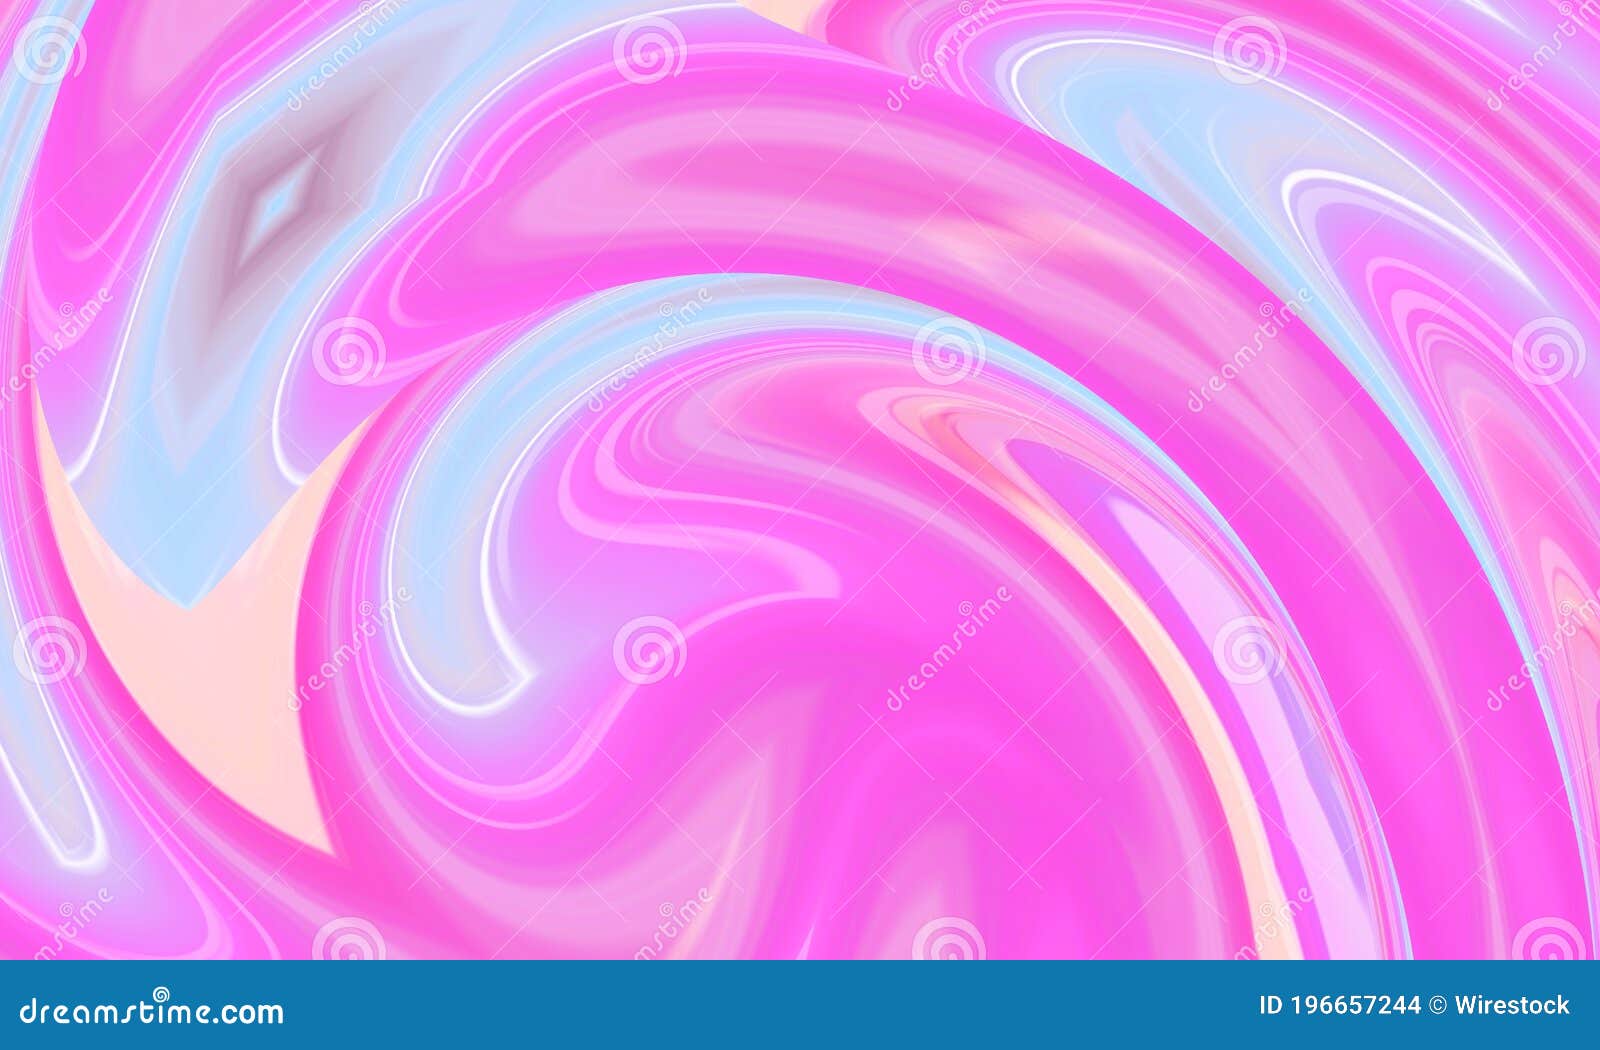 Beautiful Vibrant Illustration in Pink Color for Cool Background or  Wallpaper Stock Photo - Image of colors, colorful: 196657244